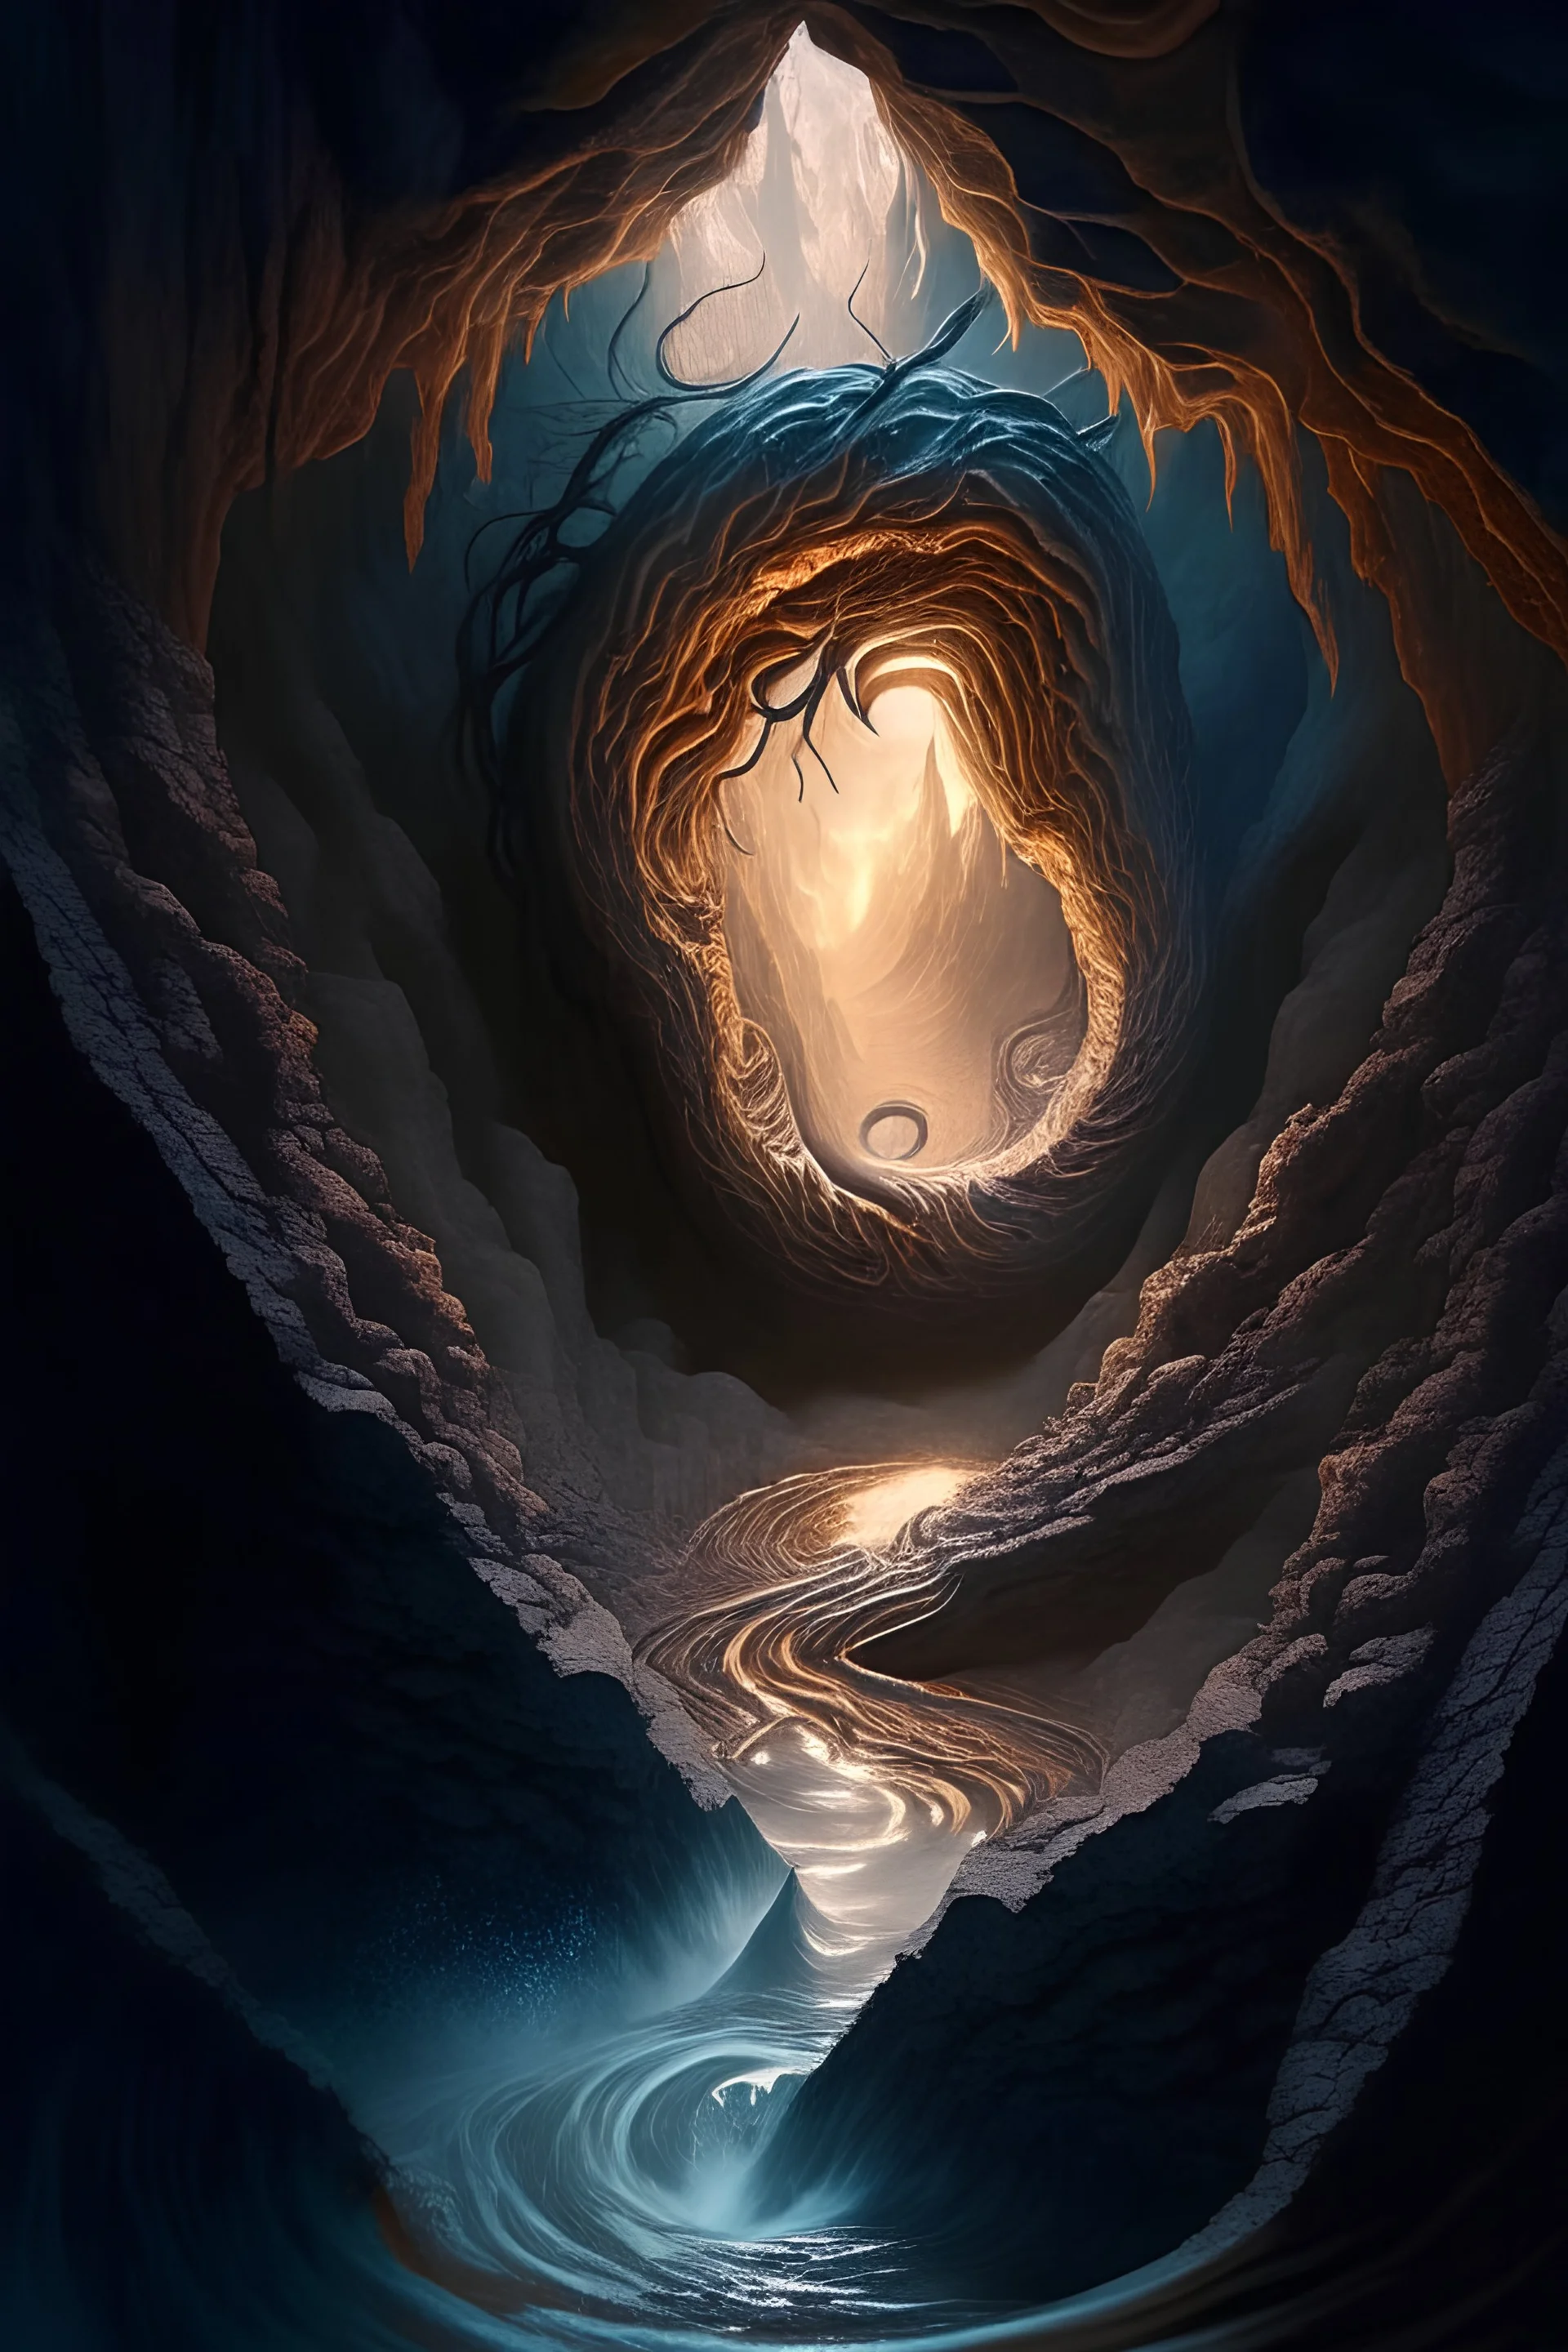 the meandering spirit rises through the chasm of the underworld